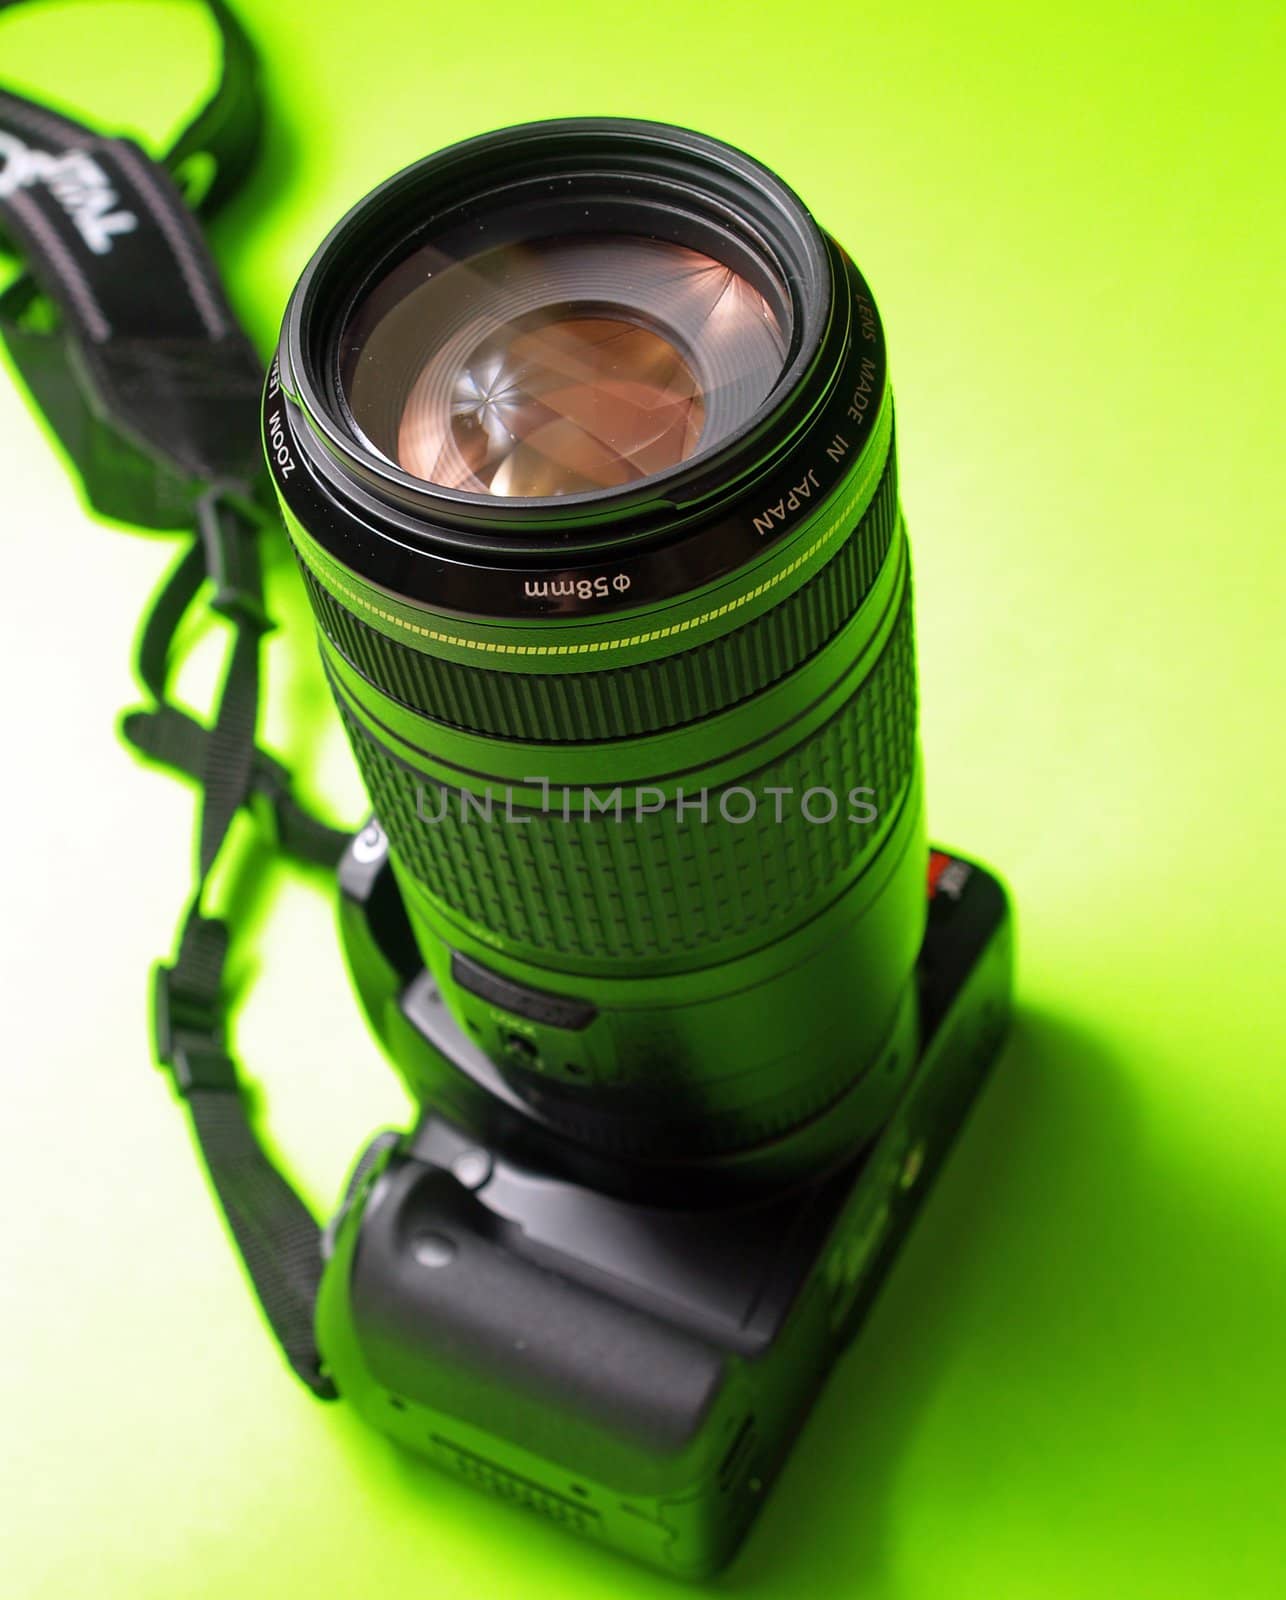 A digital SLR with a telephoto zoom lens